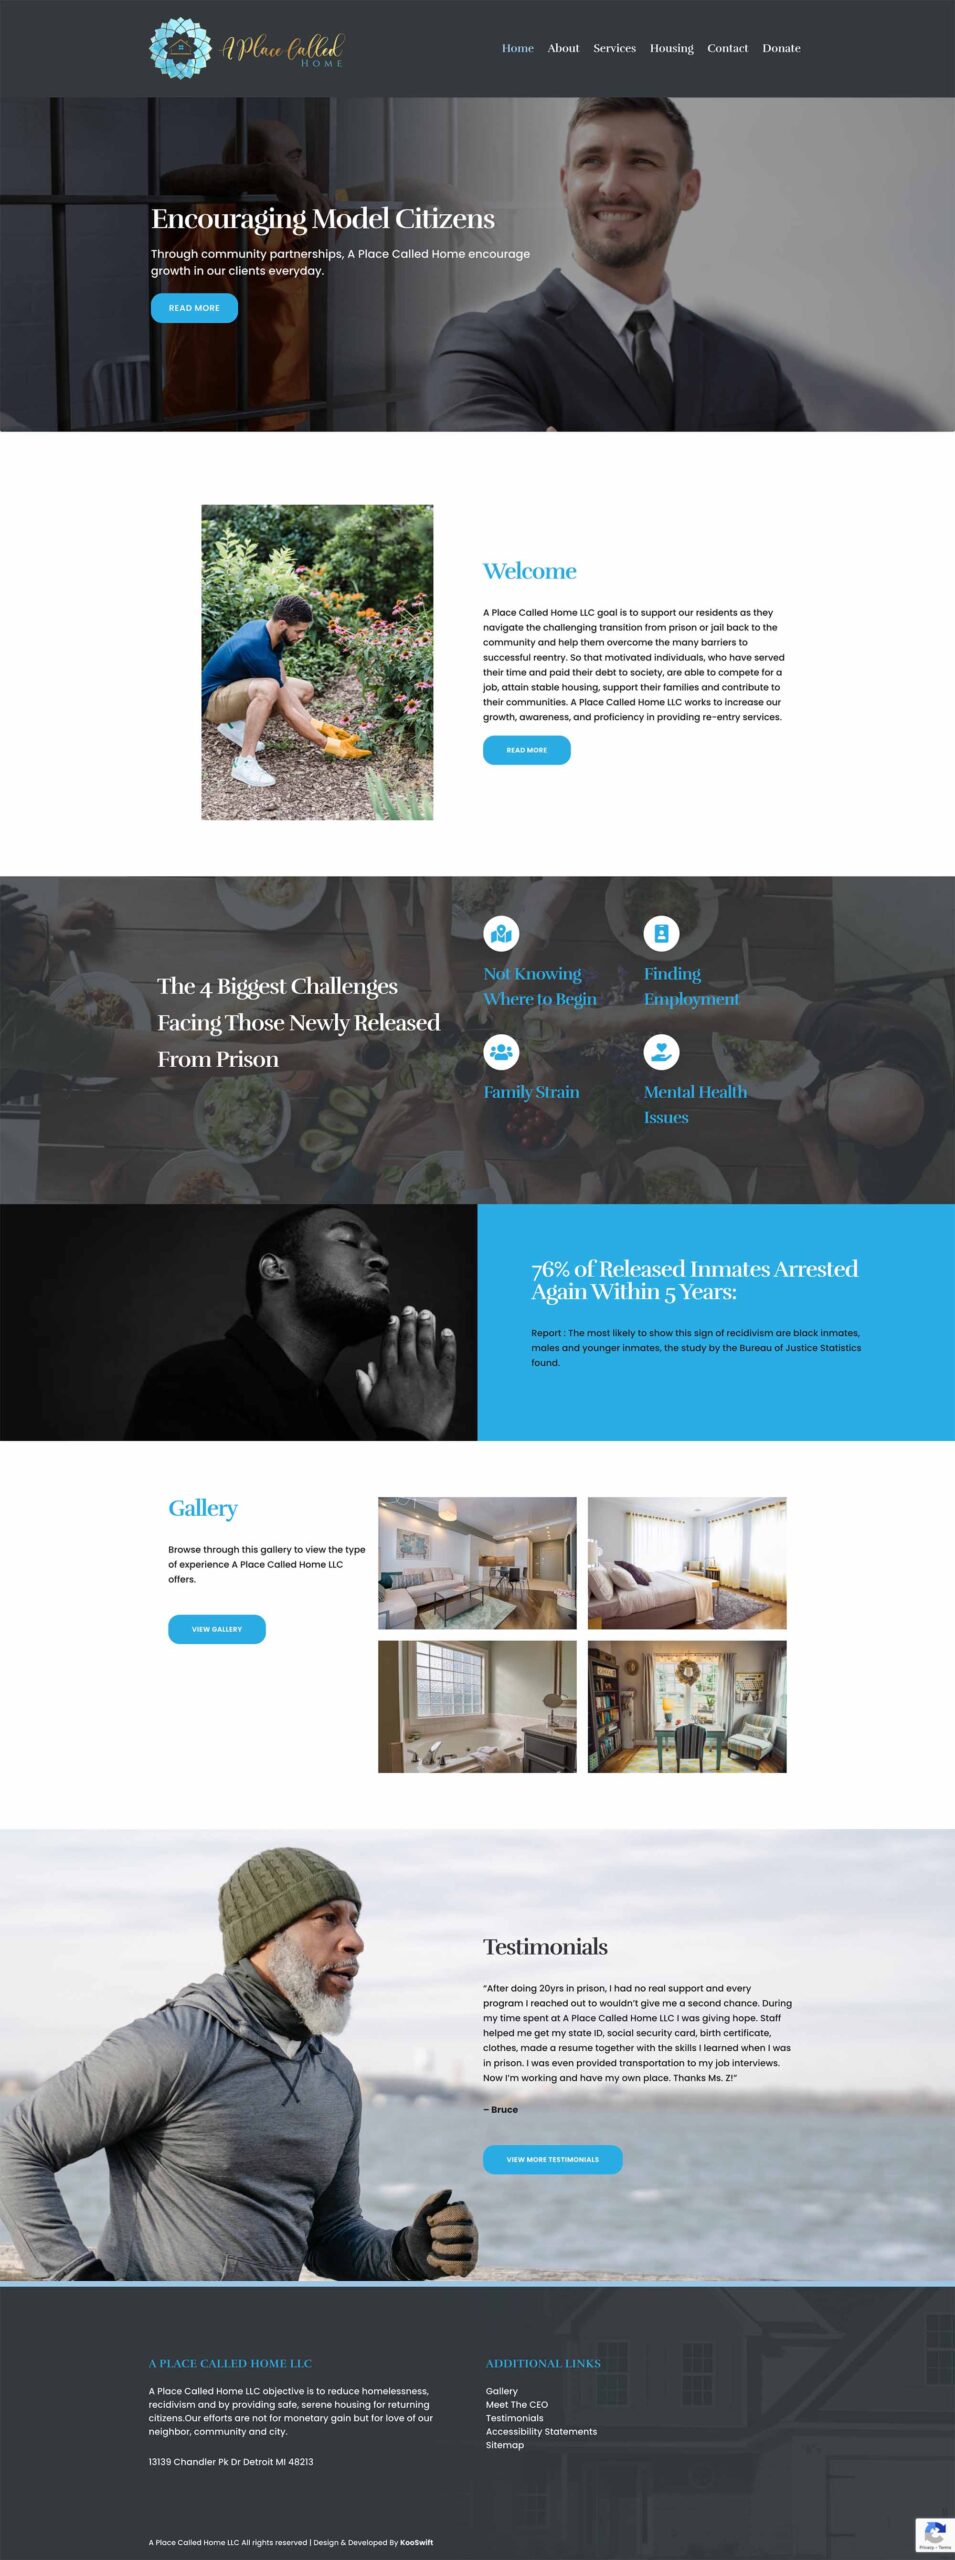 A Place Called Home LLC Homepage